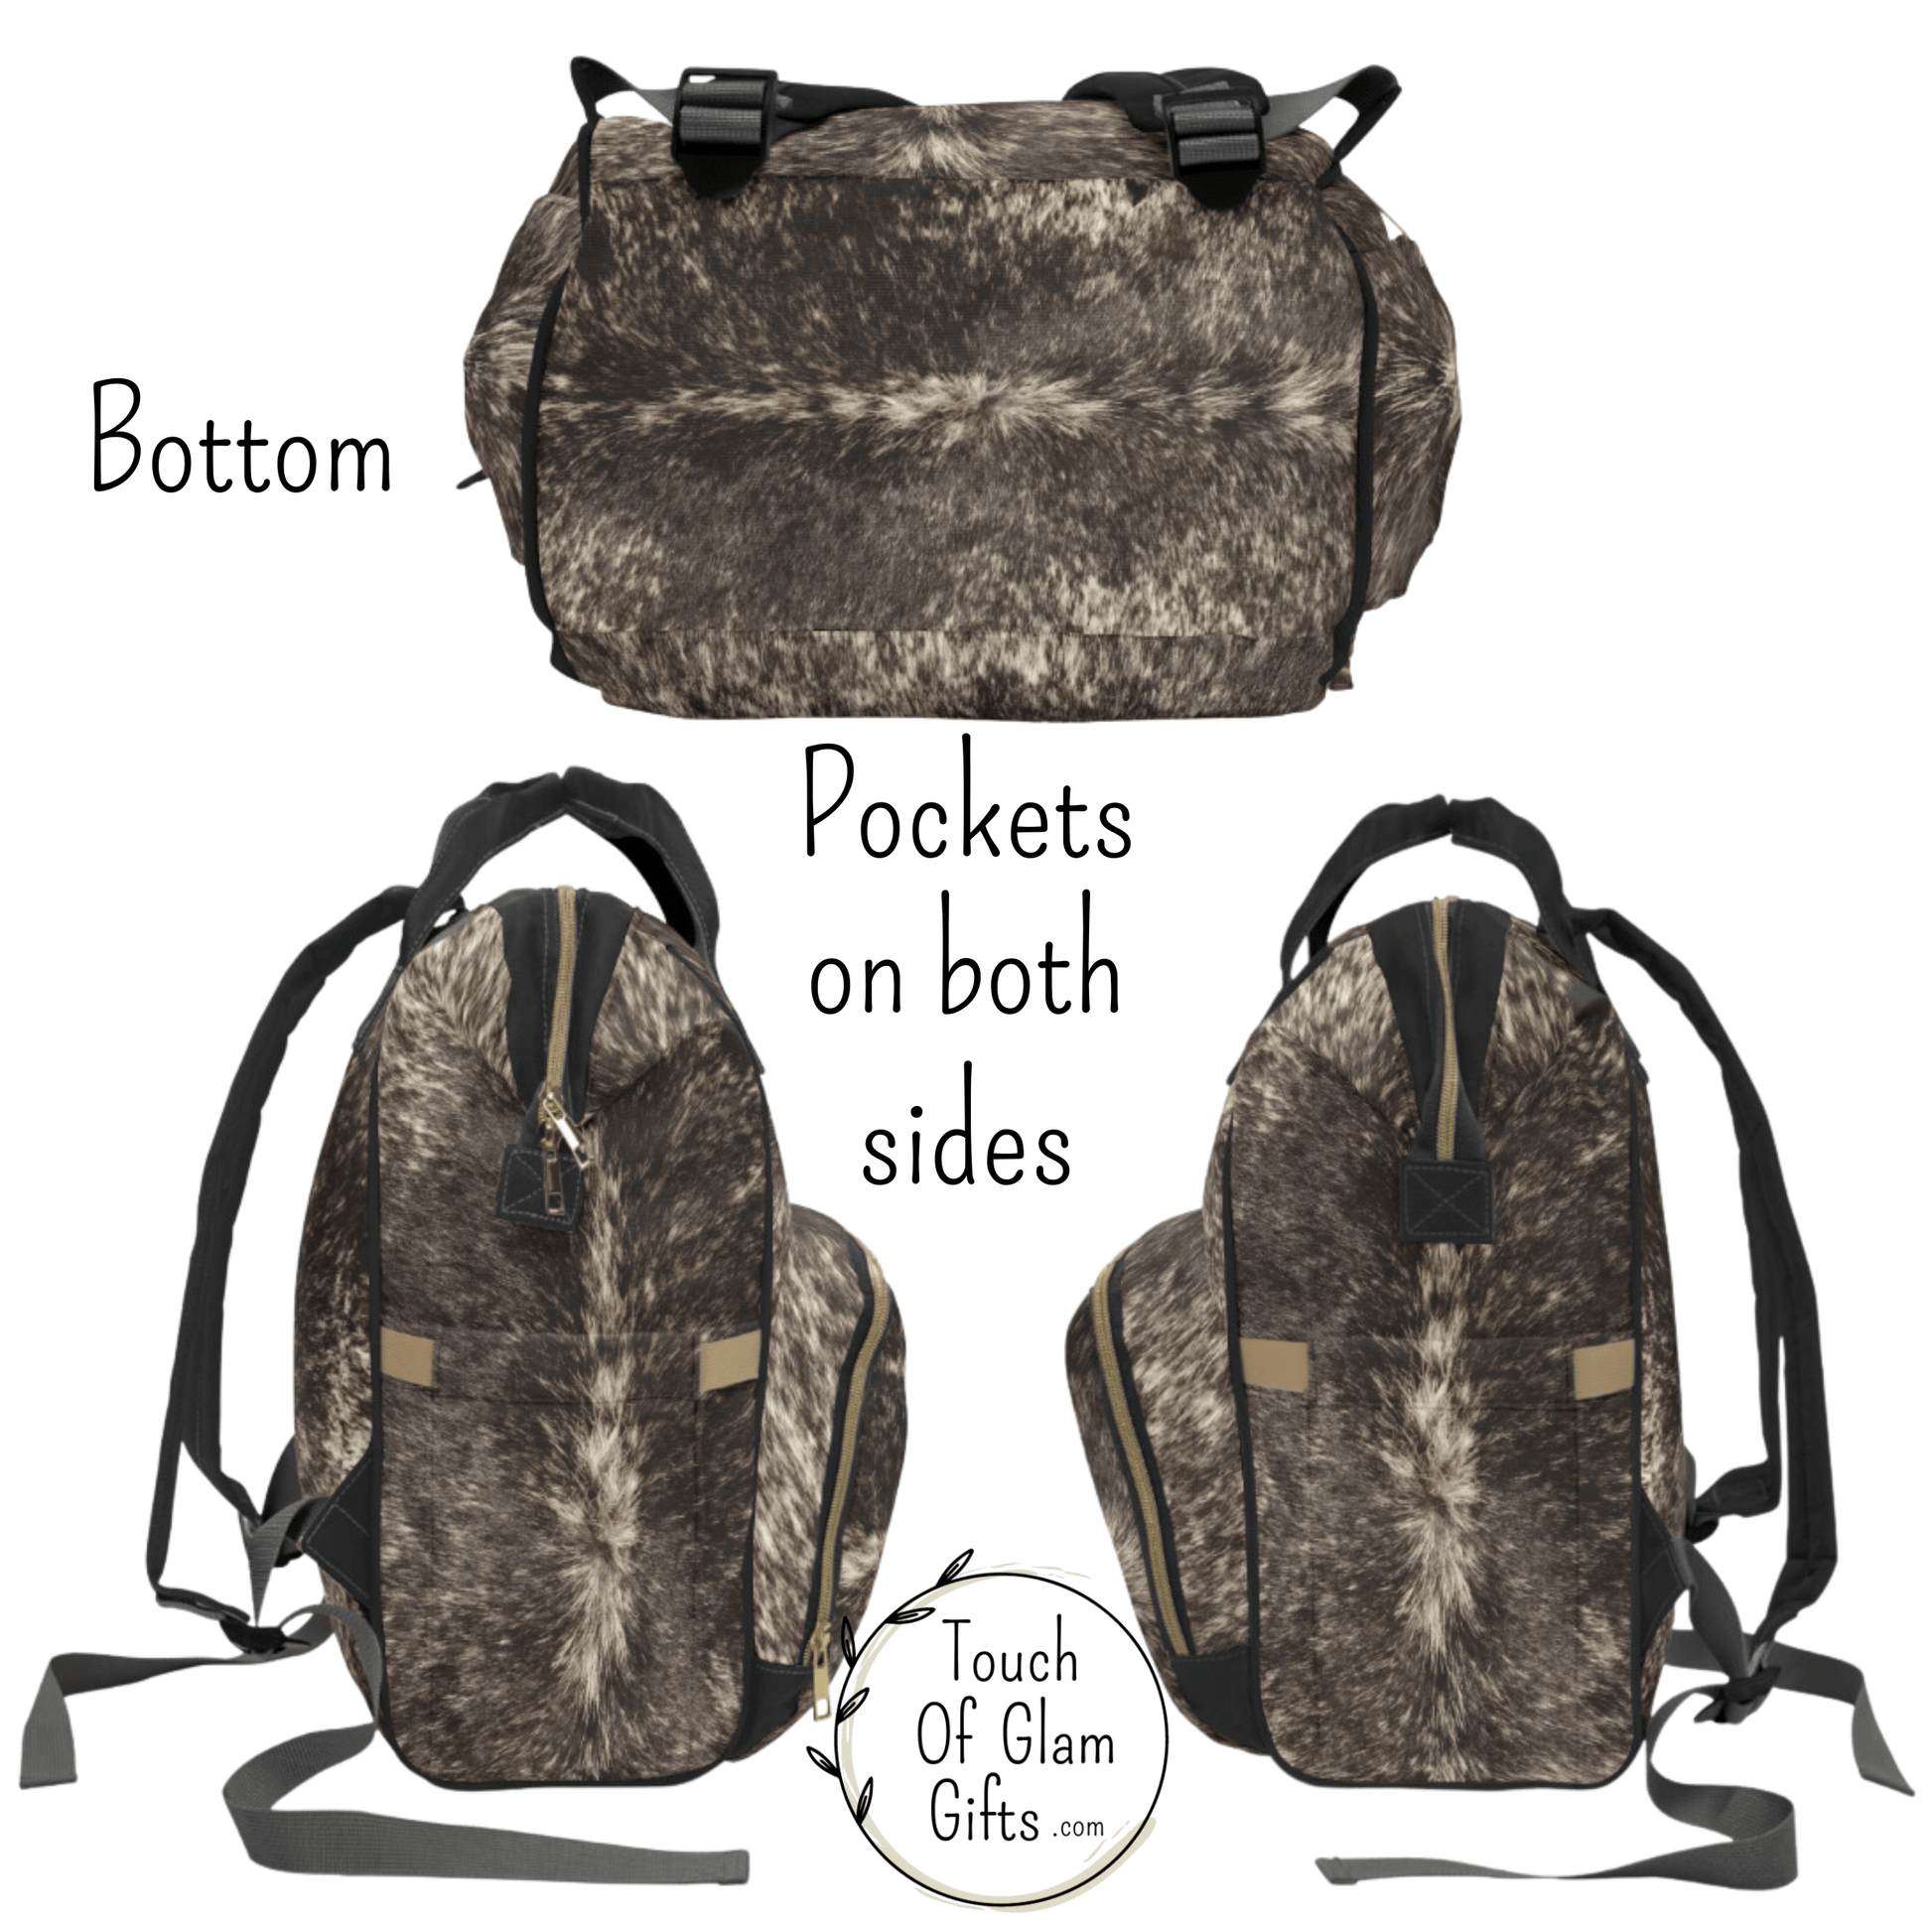 close views of the bottom of the cowhide backpack shows the brown cow print on the bottom and both sides have pockets for water bottles on the exterior. 